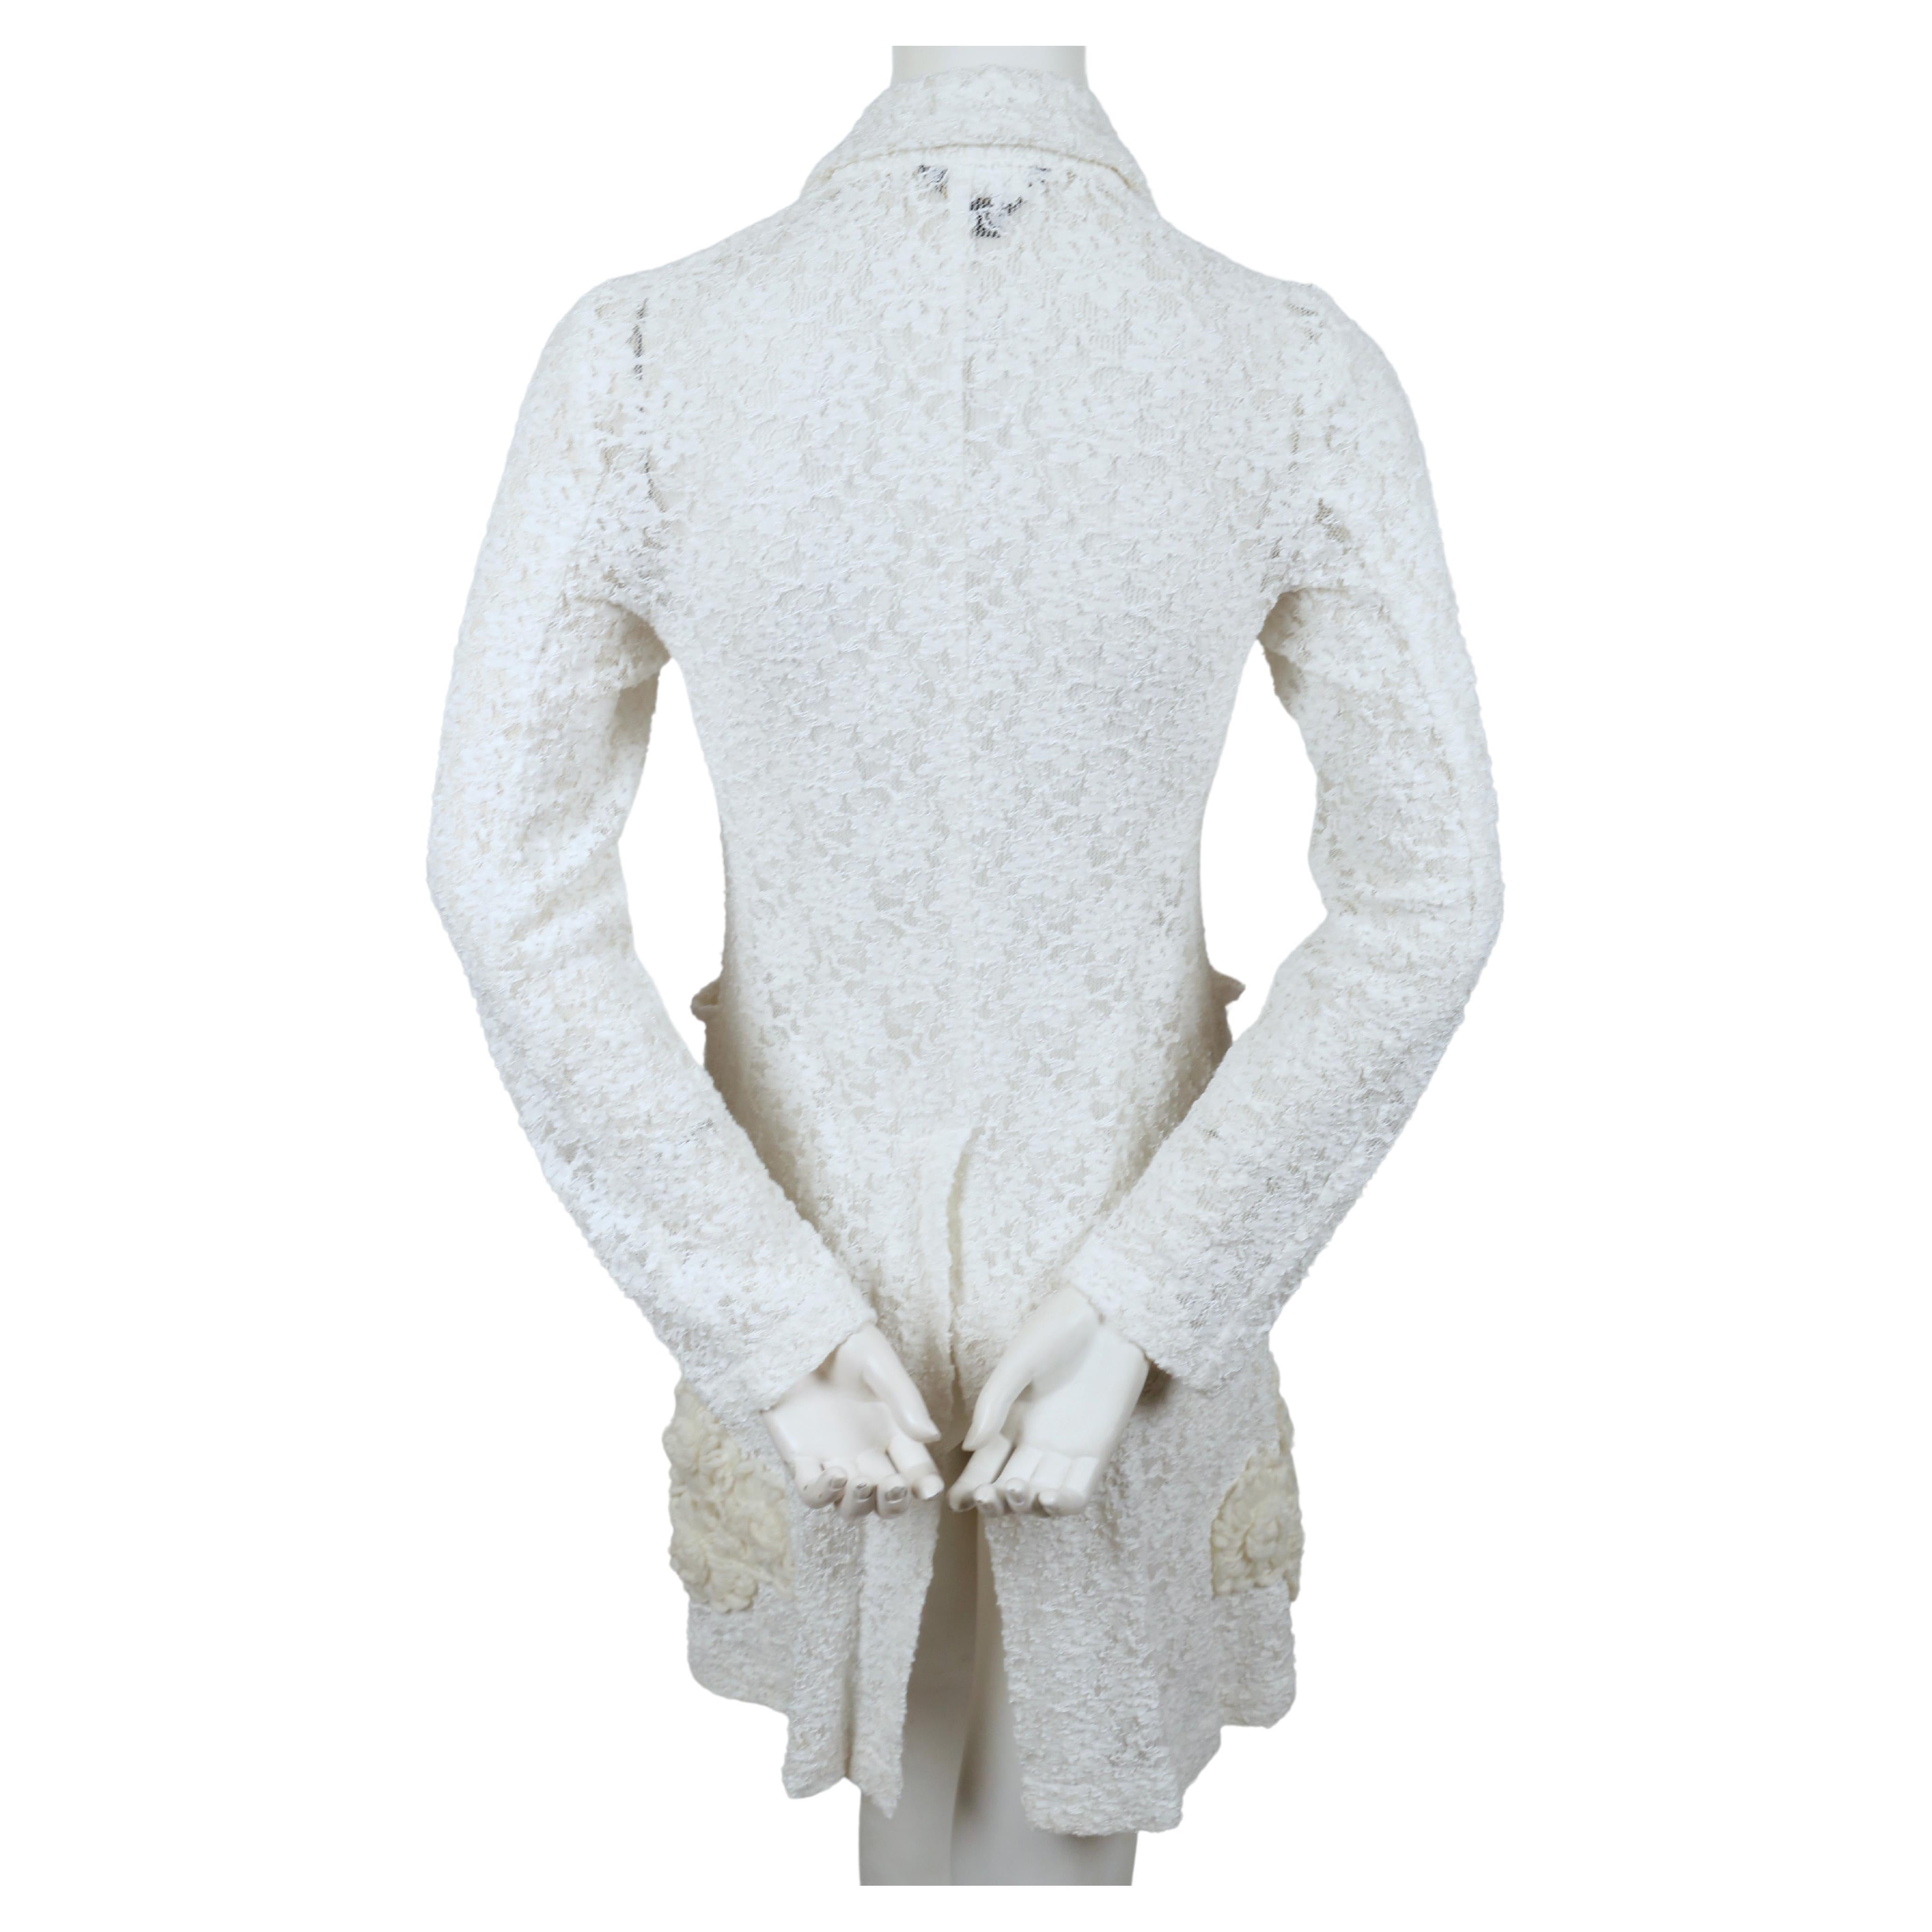 2012 COMME DES GARCONS off-white lace jacket with knit flower detail For Sale 1